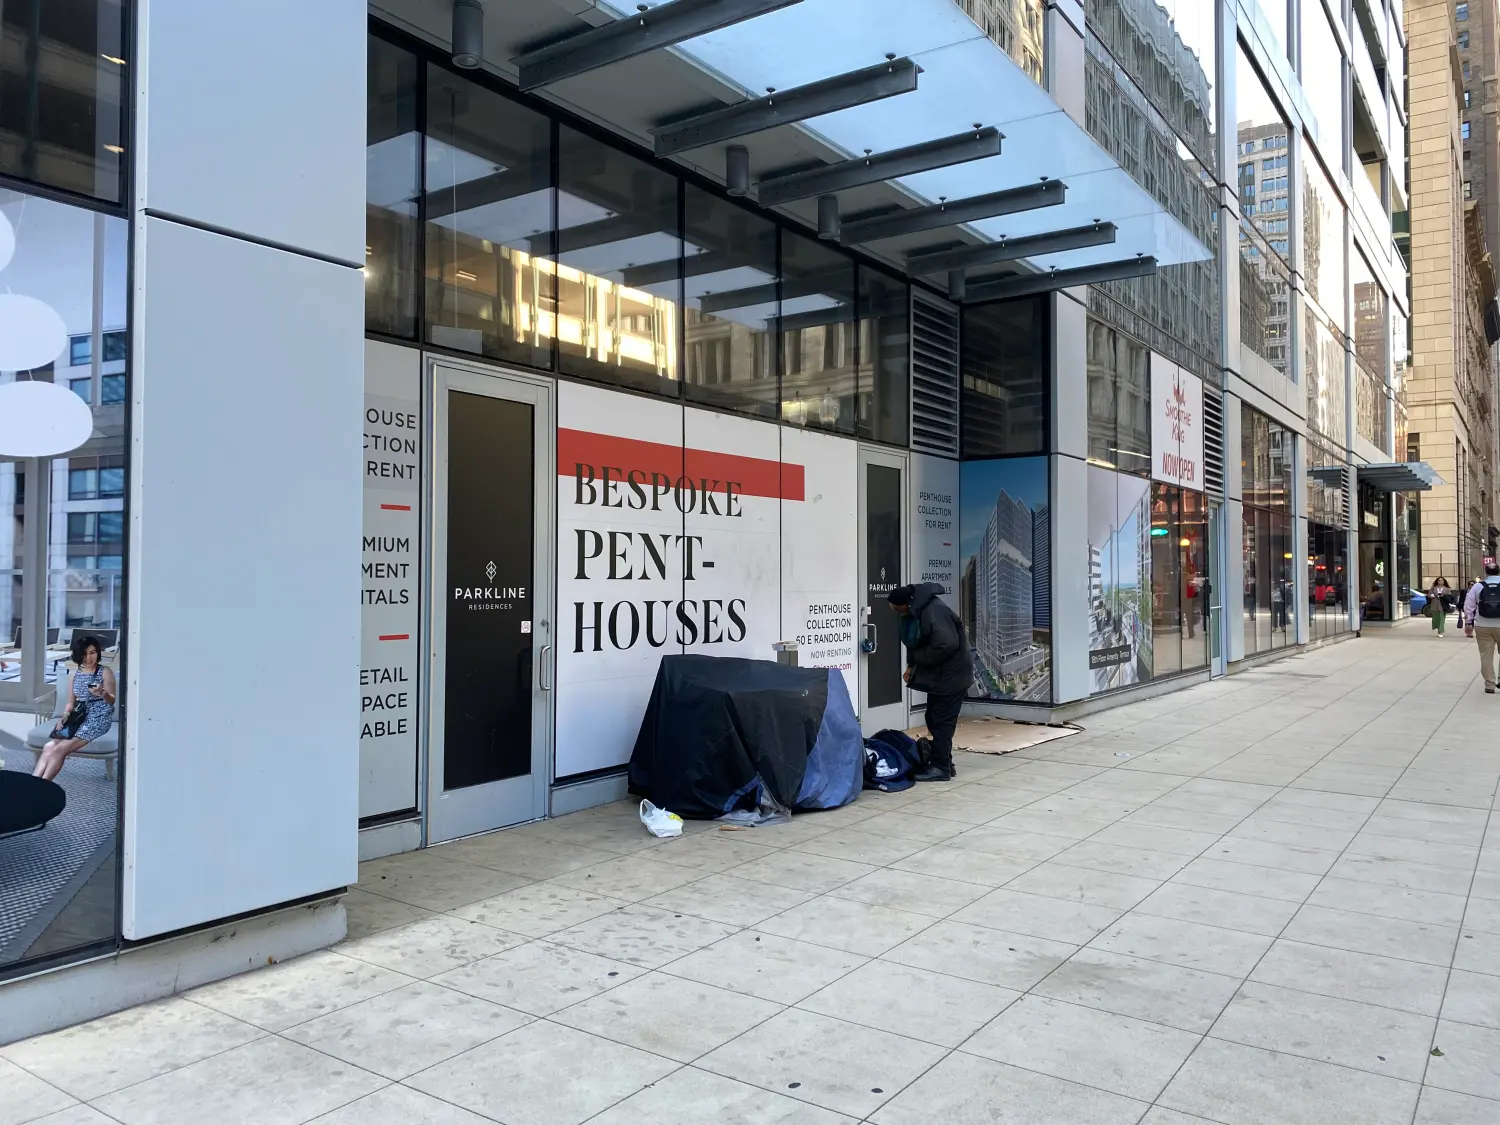 Downtown Chicago - homeless, black male outside of residence building advertising penthouse collection